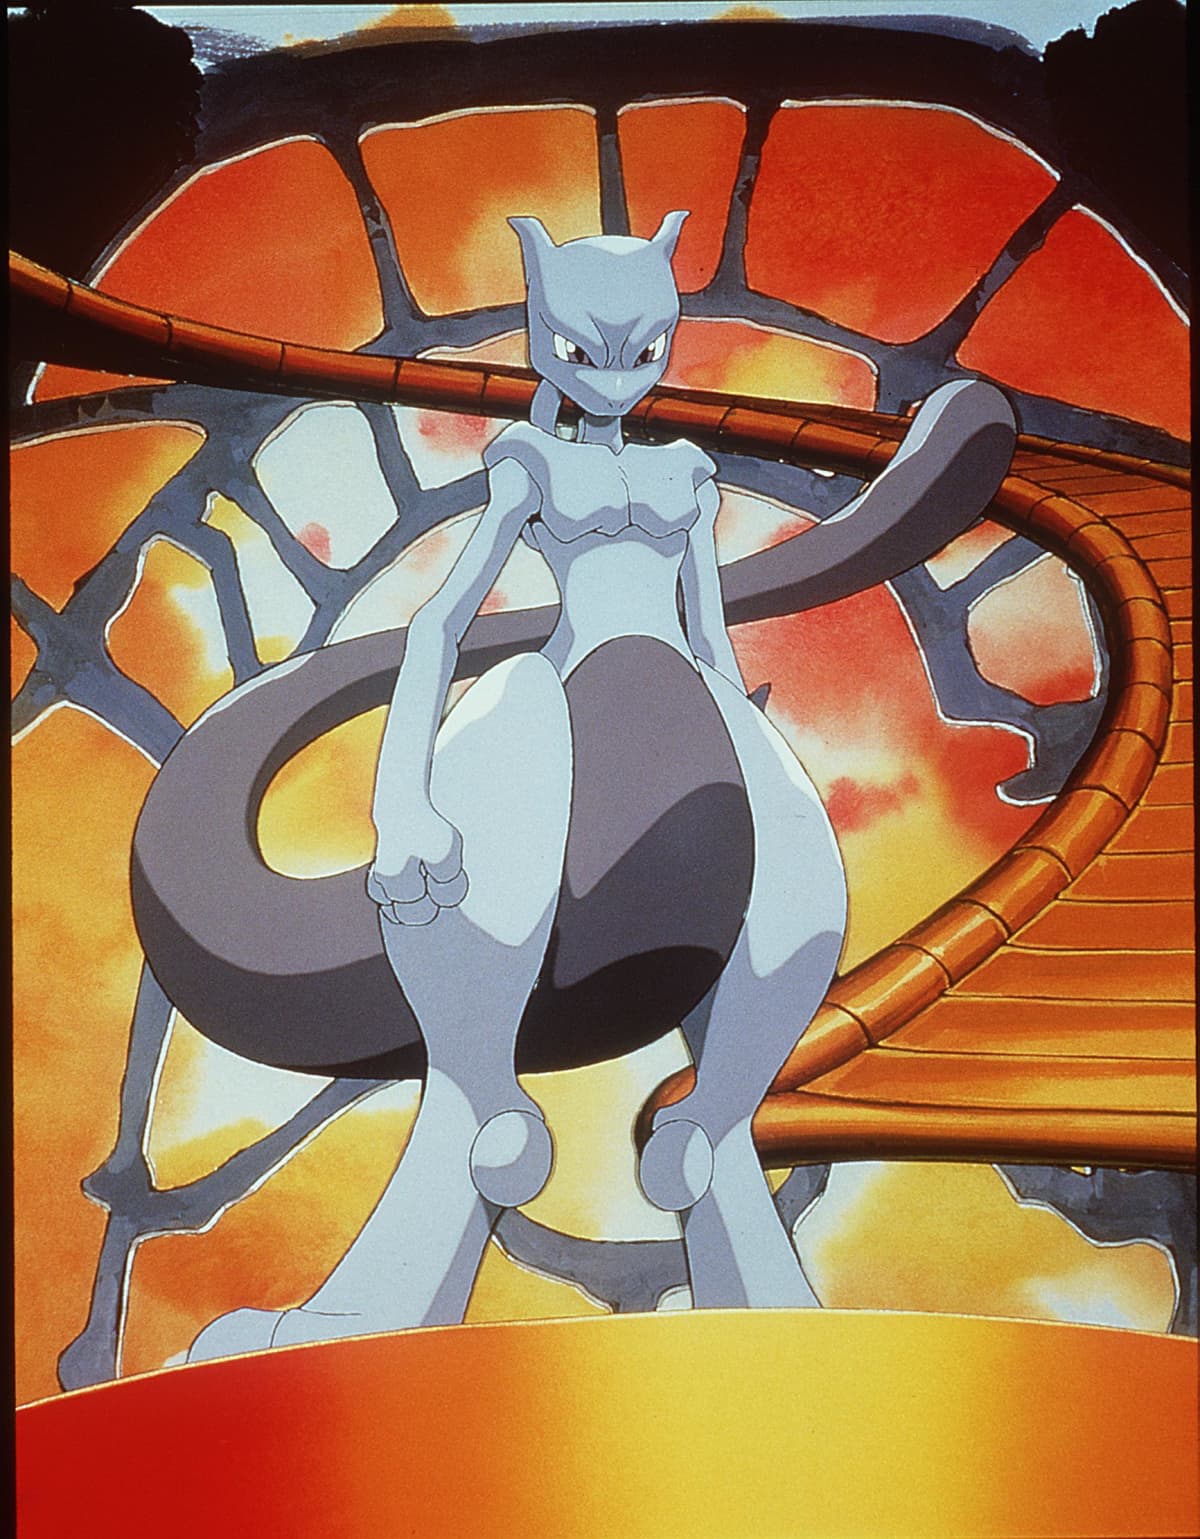 The Biggest Problem With Mewtwo's Return In Pokémon